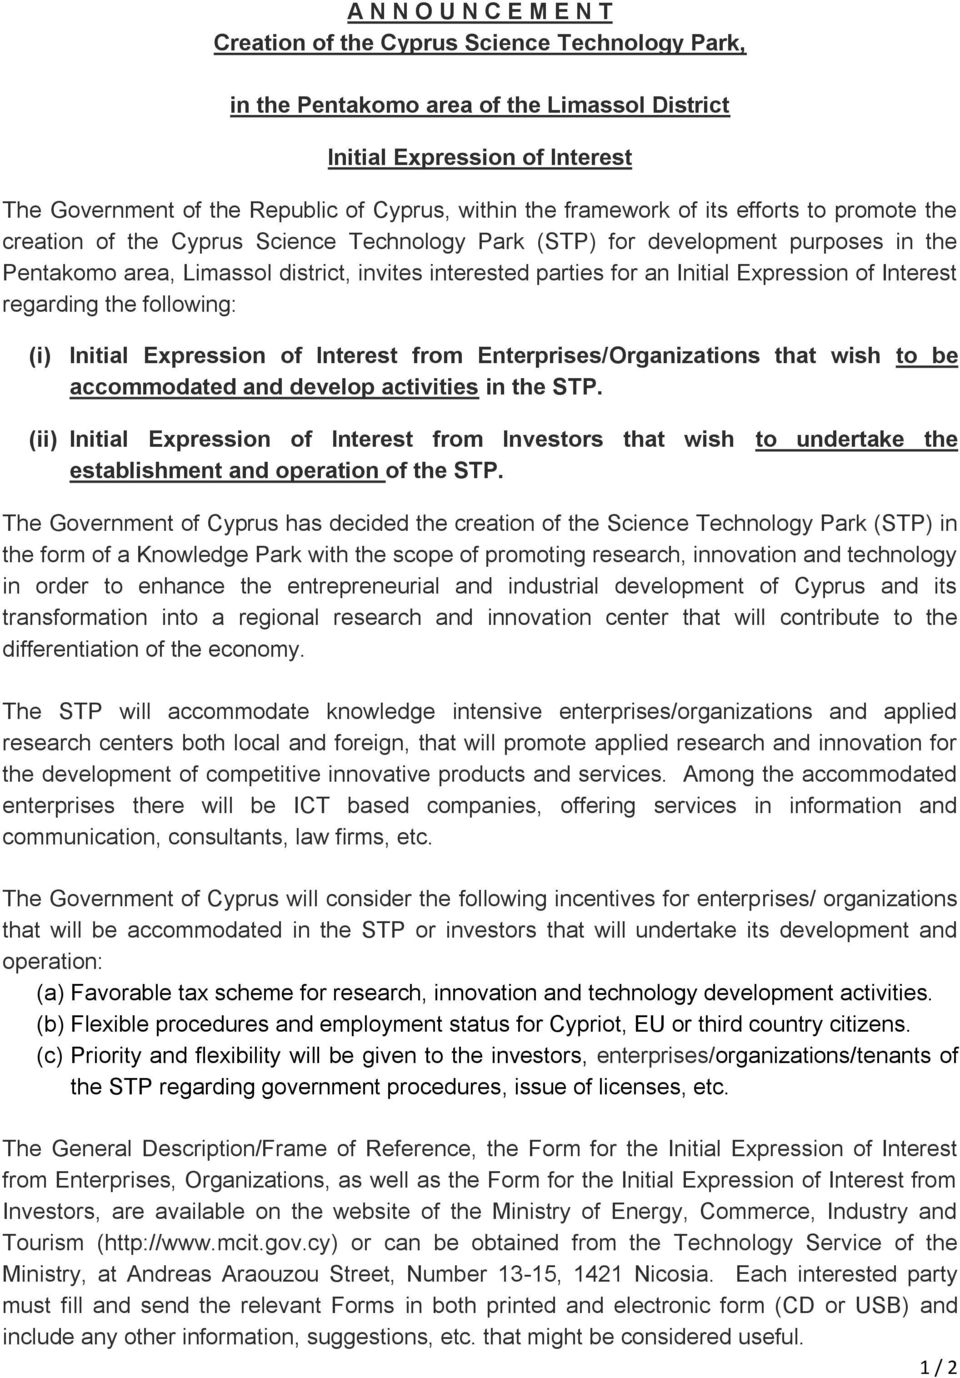 Initial Expression of Interest regarding the following: (i) Initial Expression of Interest from Enterprises/Organizations that wish to be accommodated and develop activities in the STP.